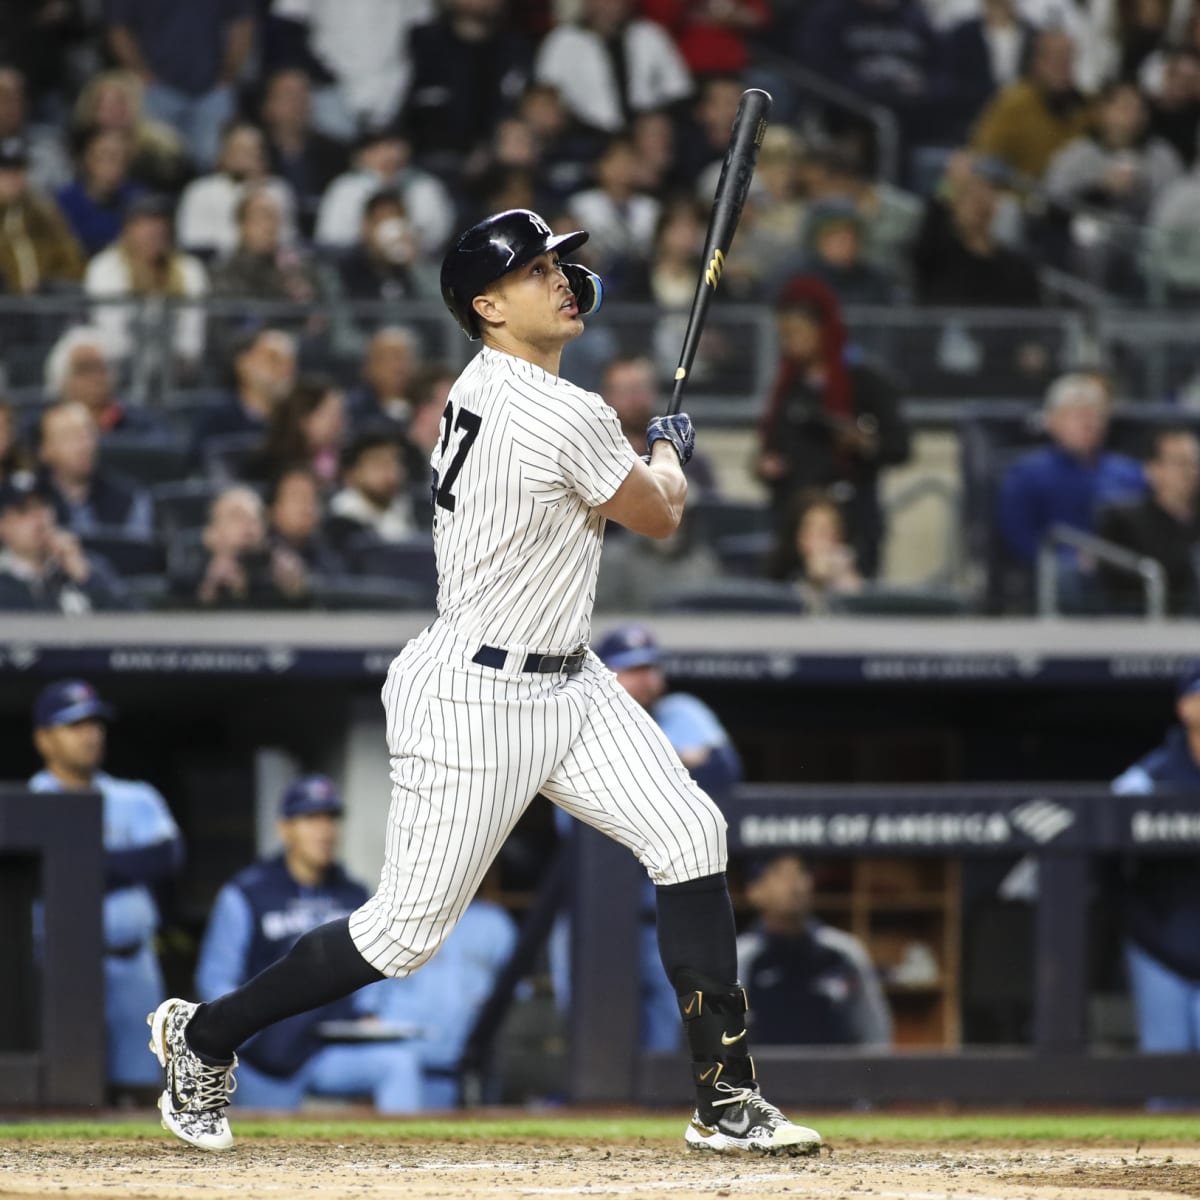 New York Yankees DH Giancarlo Stanton Exits Game With Calf Injury